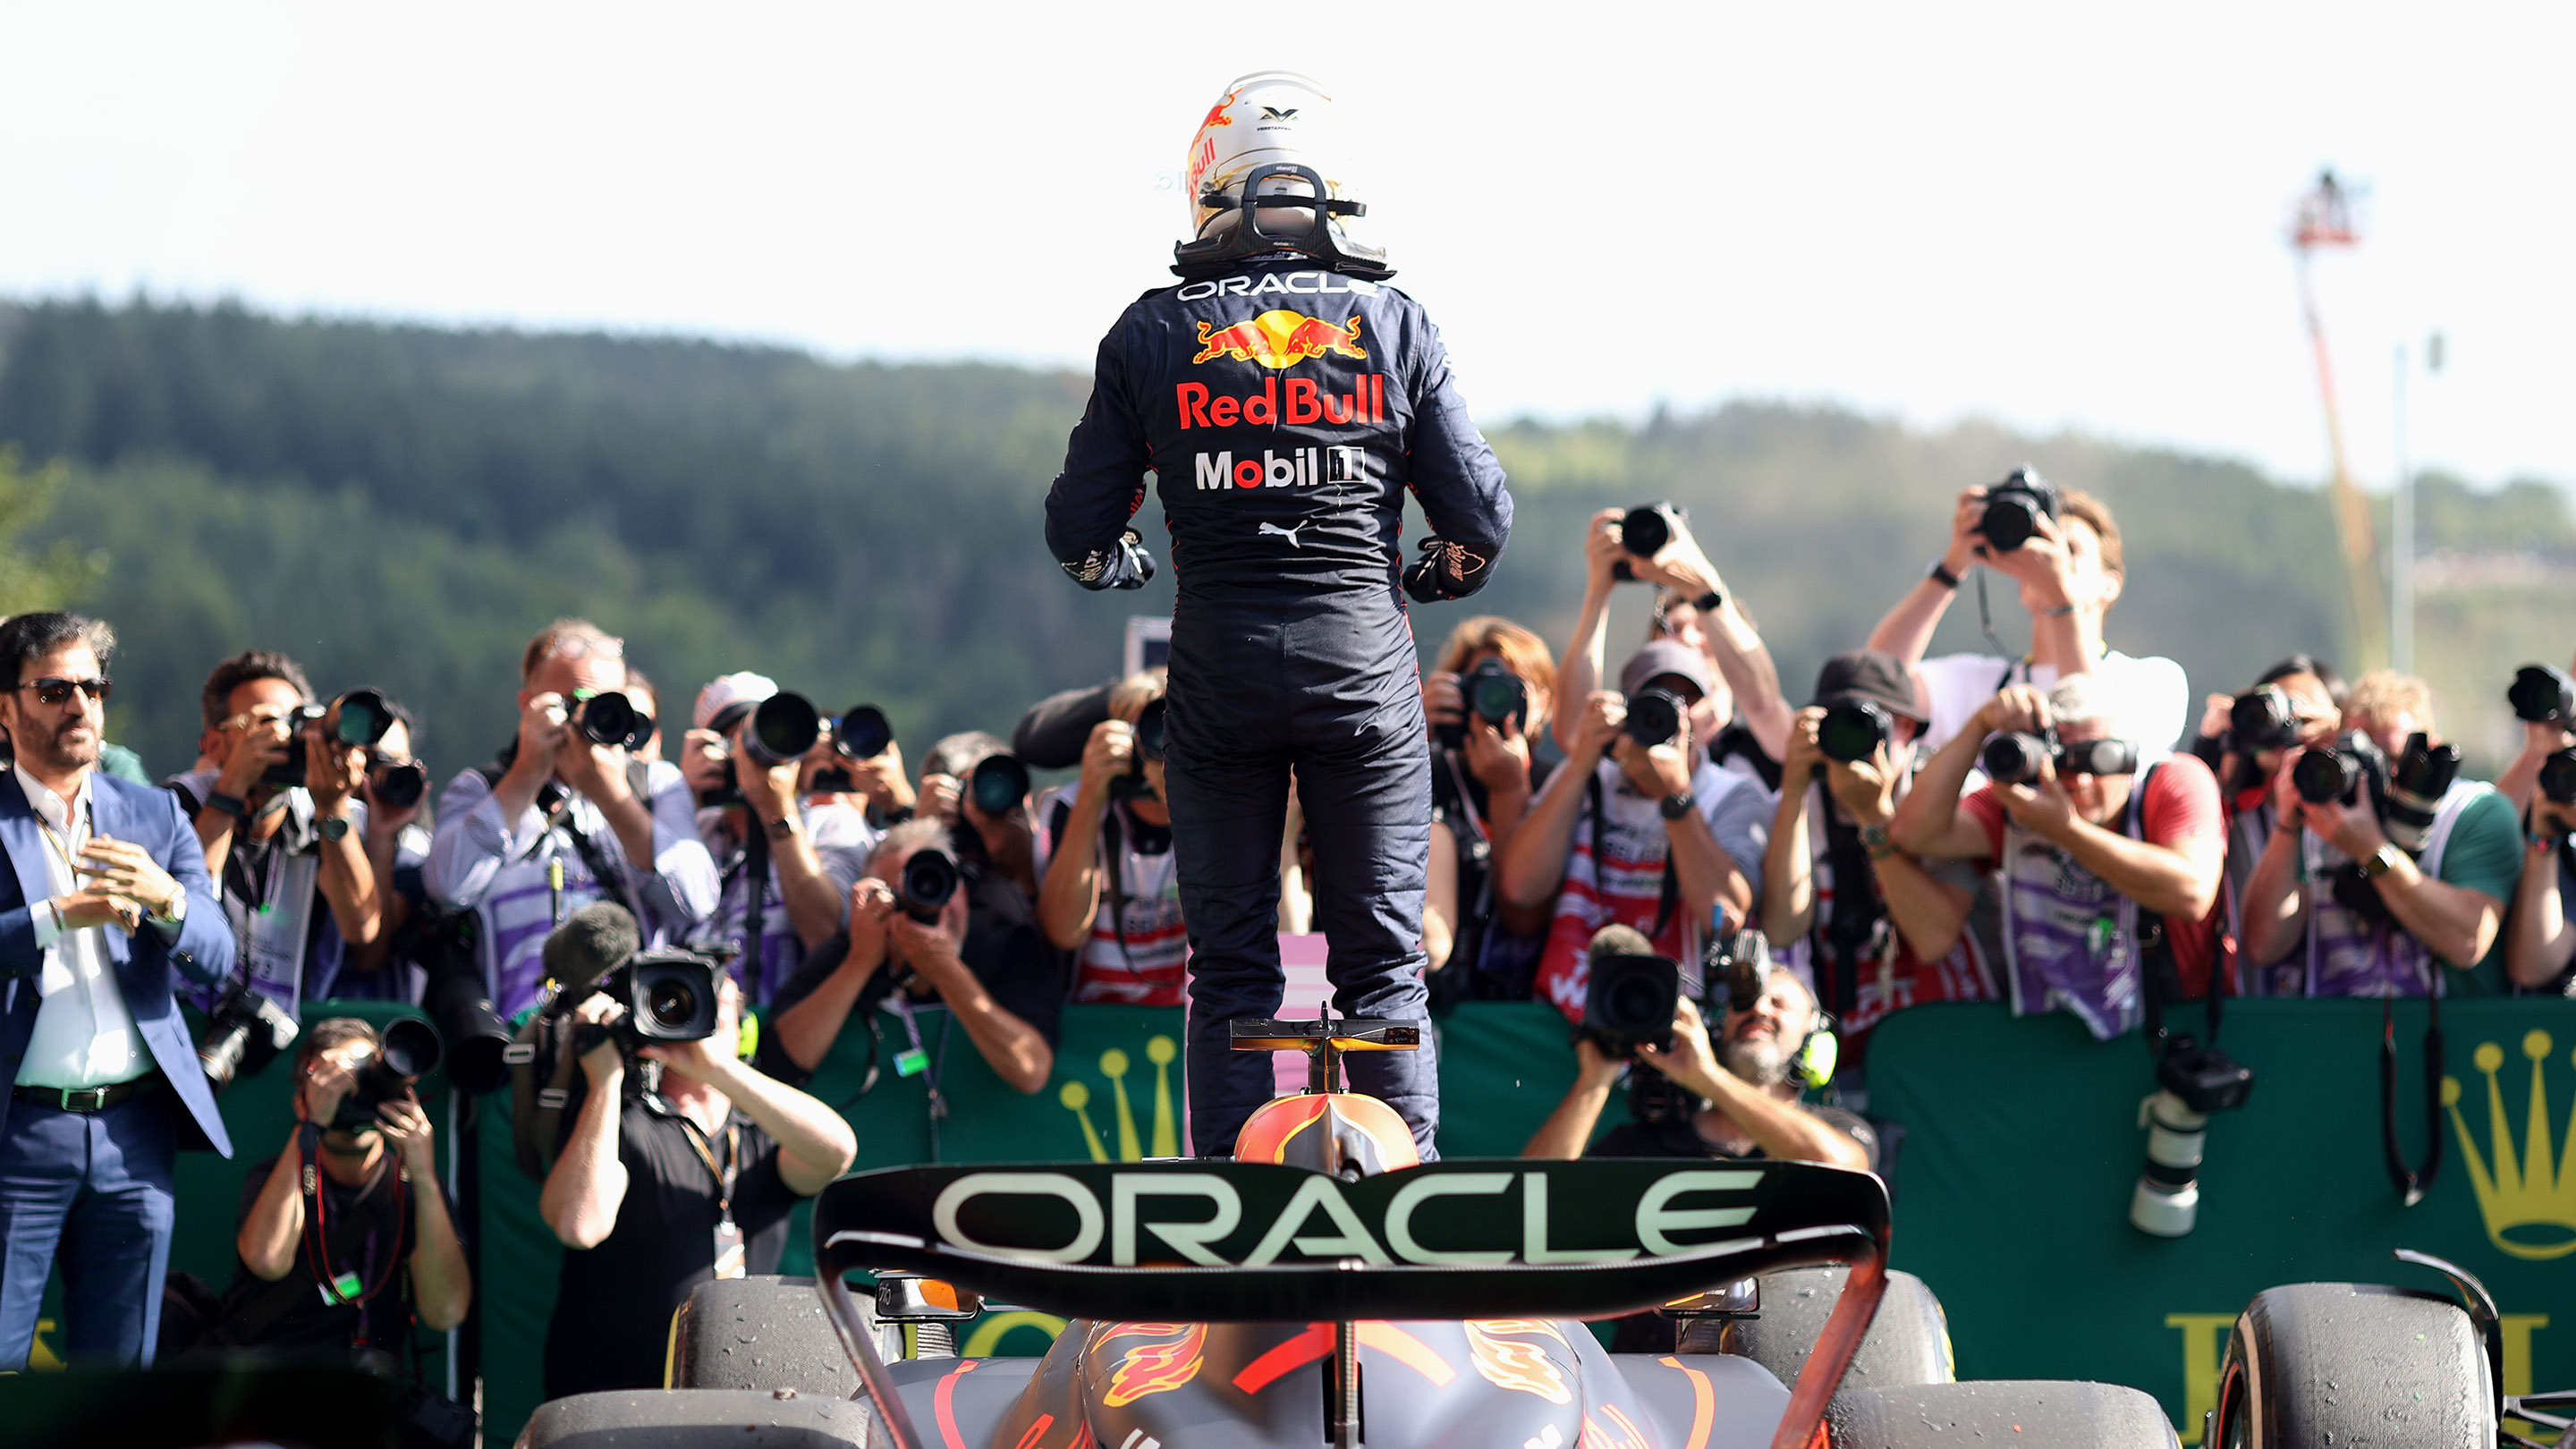 SPA, BELGIUM - AUGUST 28: Race winner Max Verstappen of the Netherlands and Oracle Red Bull Racing celebrates in parc ferme during the F1 Grand Prix of Belgium at Circuit de Spa-Francorchamps on August 28, 2022 in Spa, Belgium. (Photo by Dan Mullan/Getty Images)